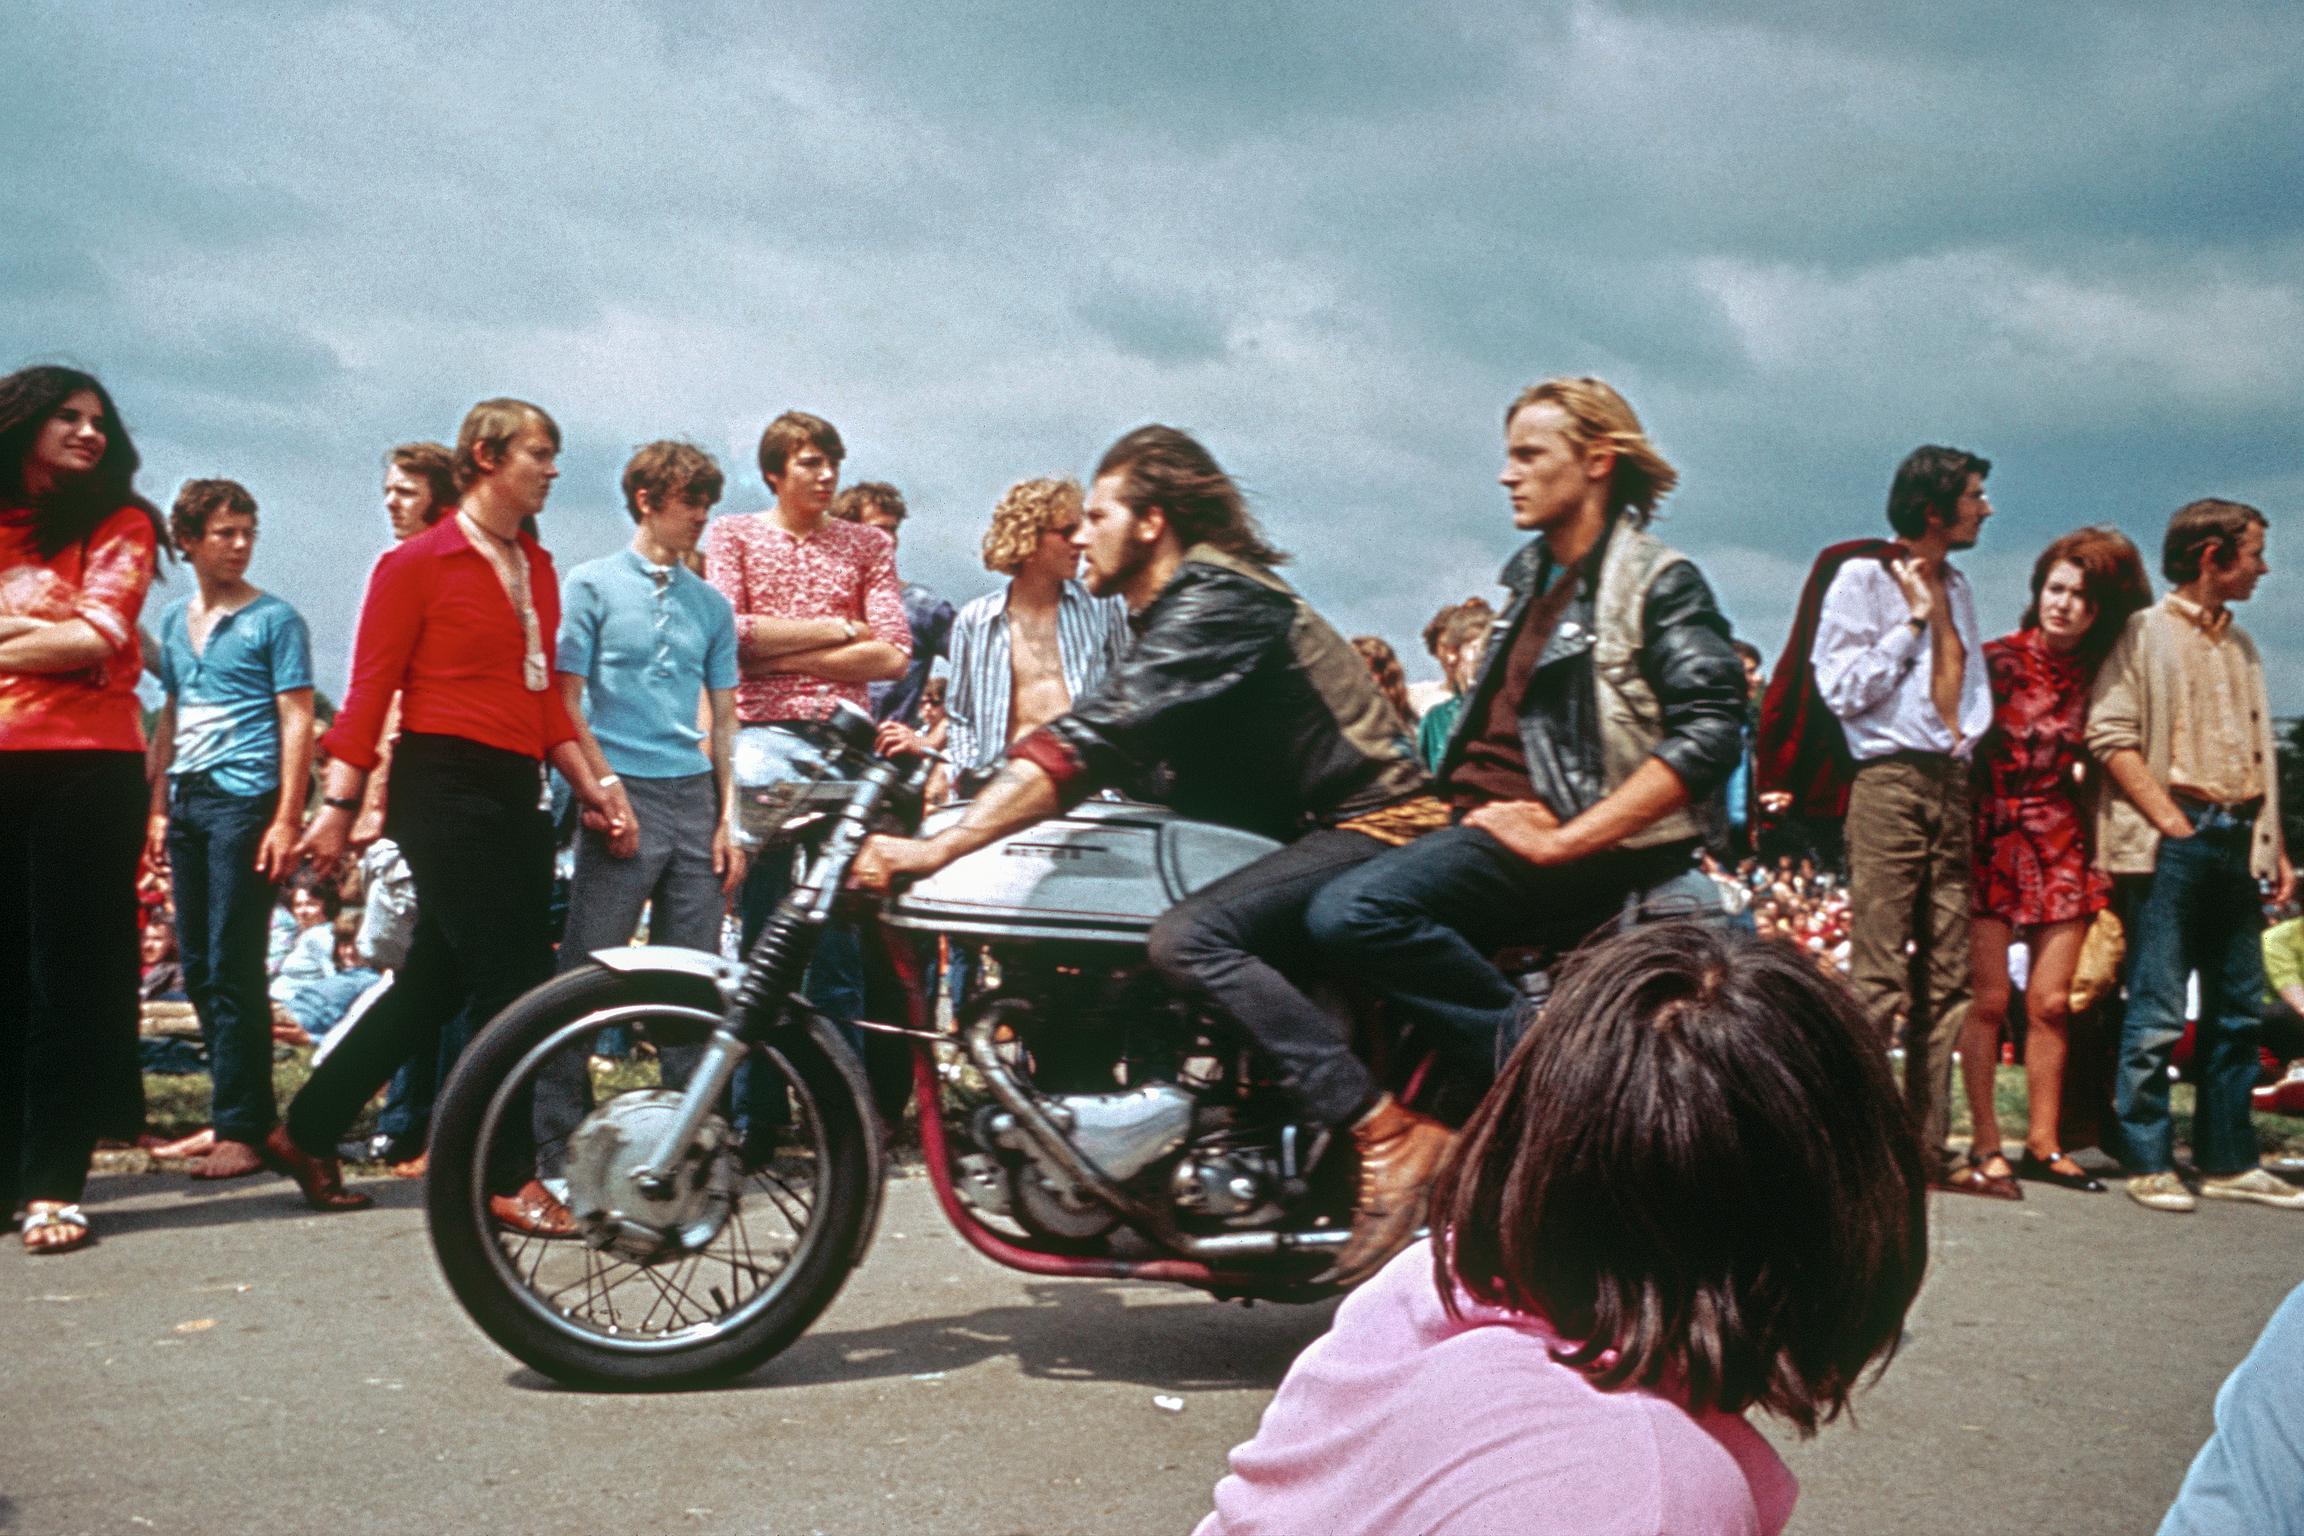 Isle of Wight Festival. The local Hells Angels are always around to add a little colour but rarely any trouble